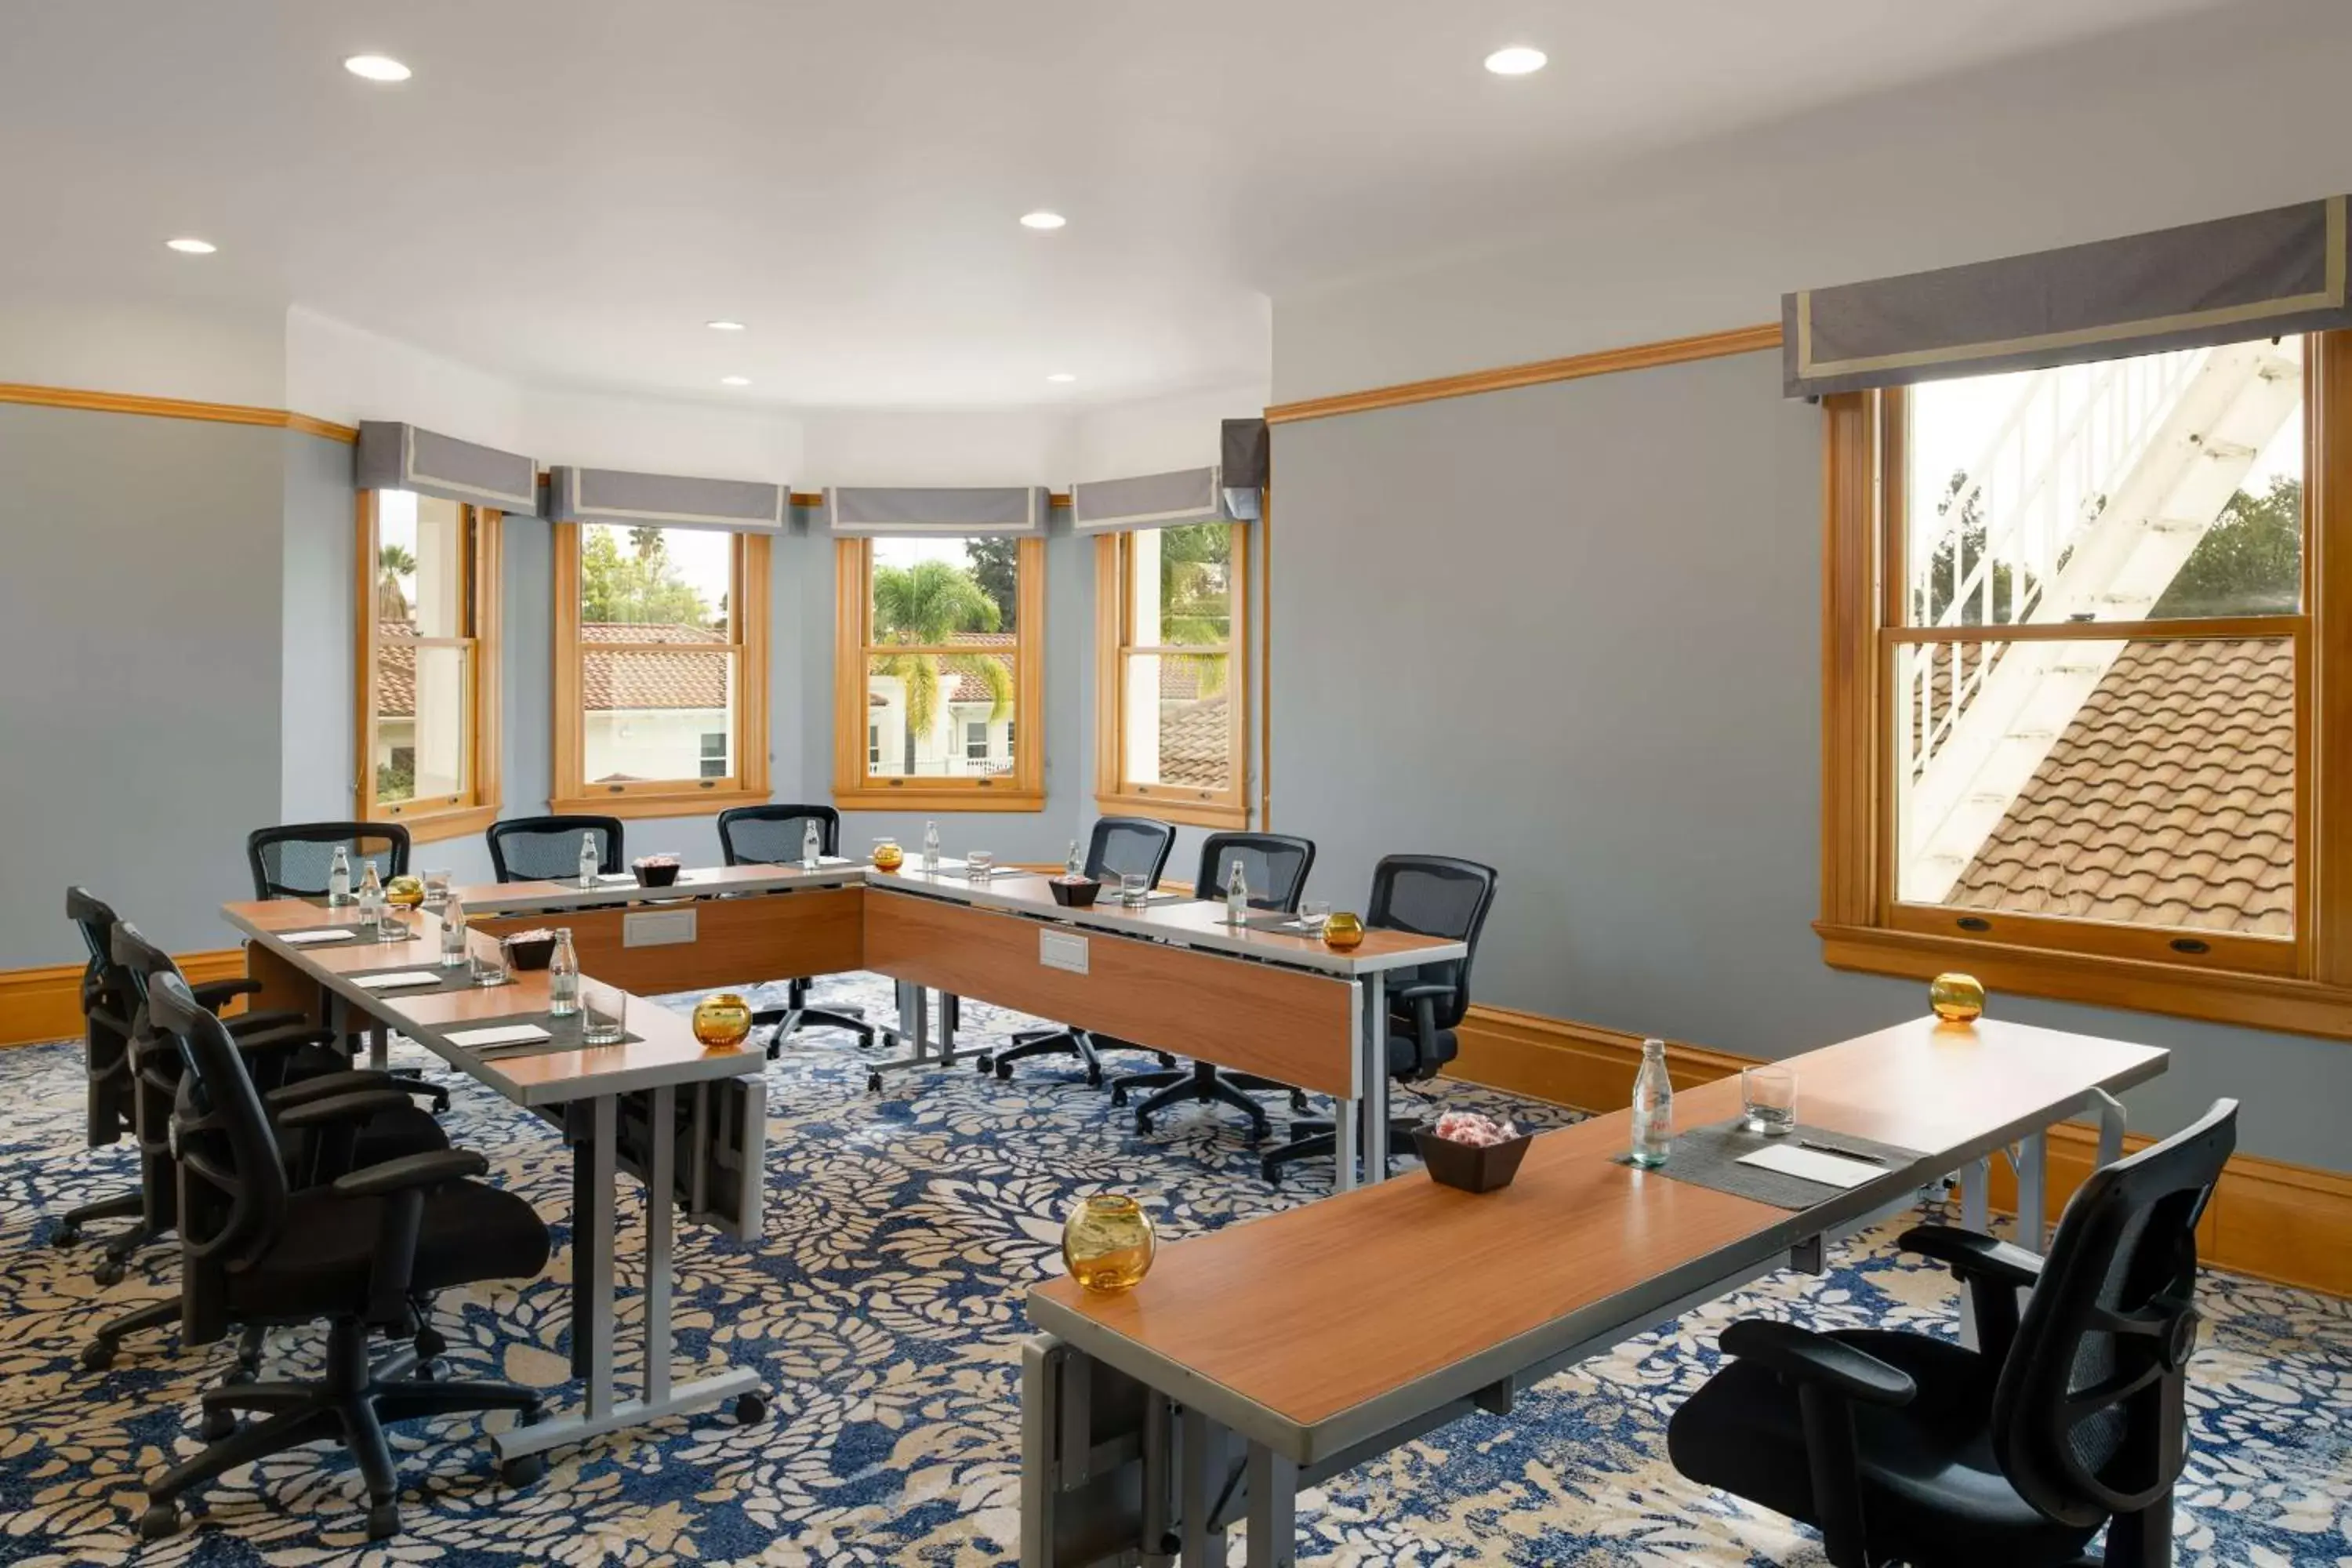 Meeting/conference room in Hayes Mansion San Jose, Curio Collection by Hilton